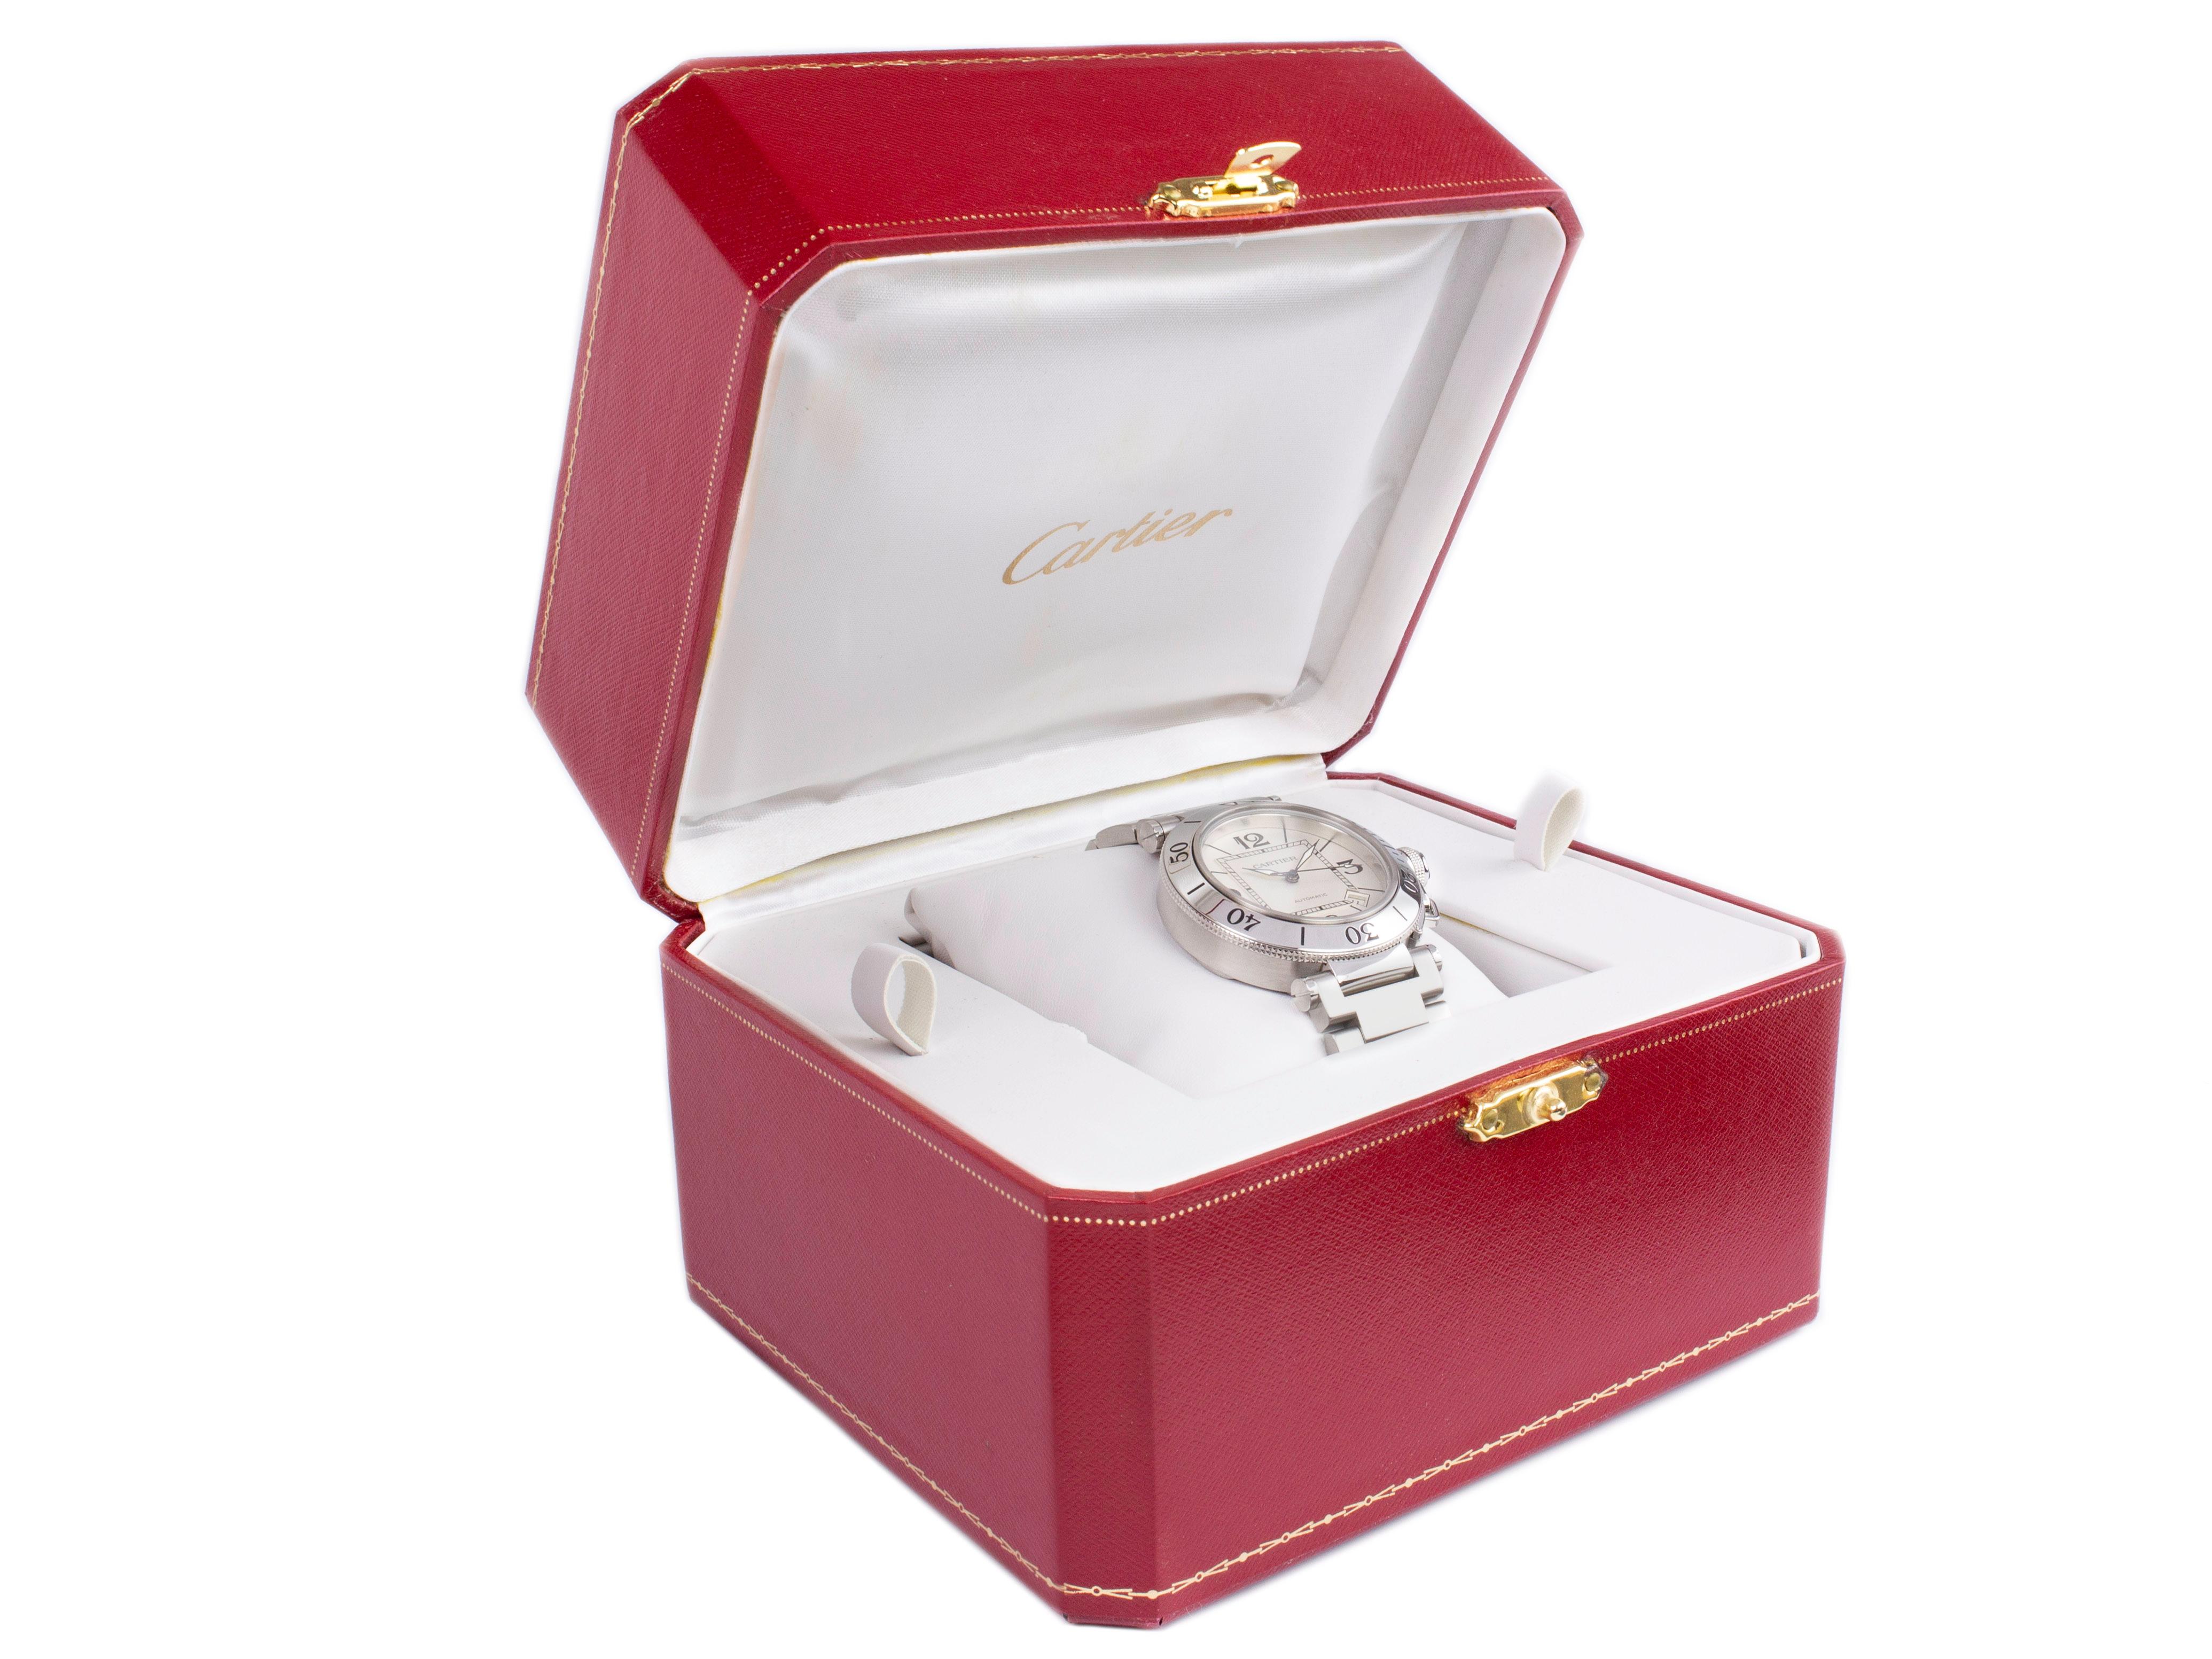 Stainless Steel Cartier Pasha Automatic Watch with a 40mm Case, Silver Dial, and Bracelet with Folding Clasp. Features include Hours, Minutes, Seconds, and Date. Comes with a Deluxe Gift Box and 2 Year Store Warranty.​

Brand	Cartier
Series	Pasha de